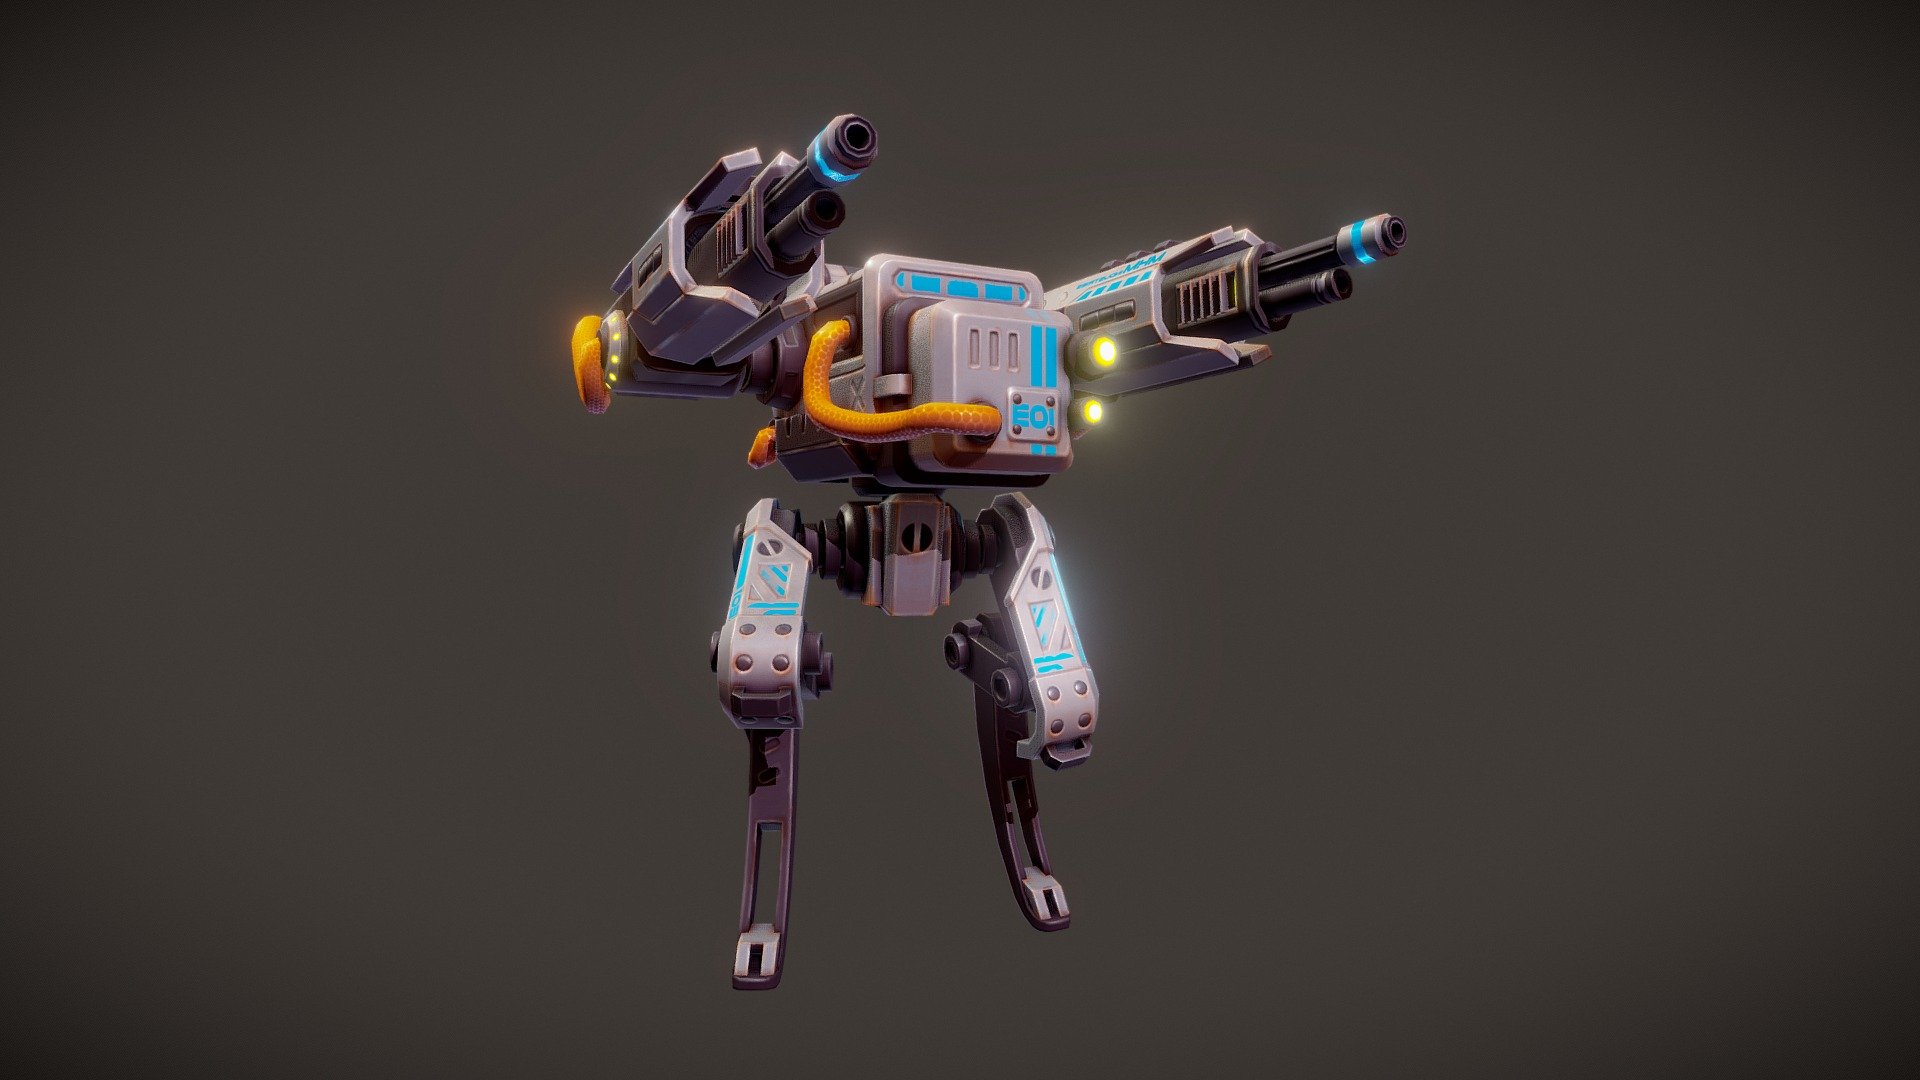 Low poly, hand painted, pbr, stylized mech.
2 materials for body and weapon (weapons can be changed).
diffuse, normal, roughness.

It was made for upcoming mobile mech game 3d model